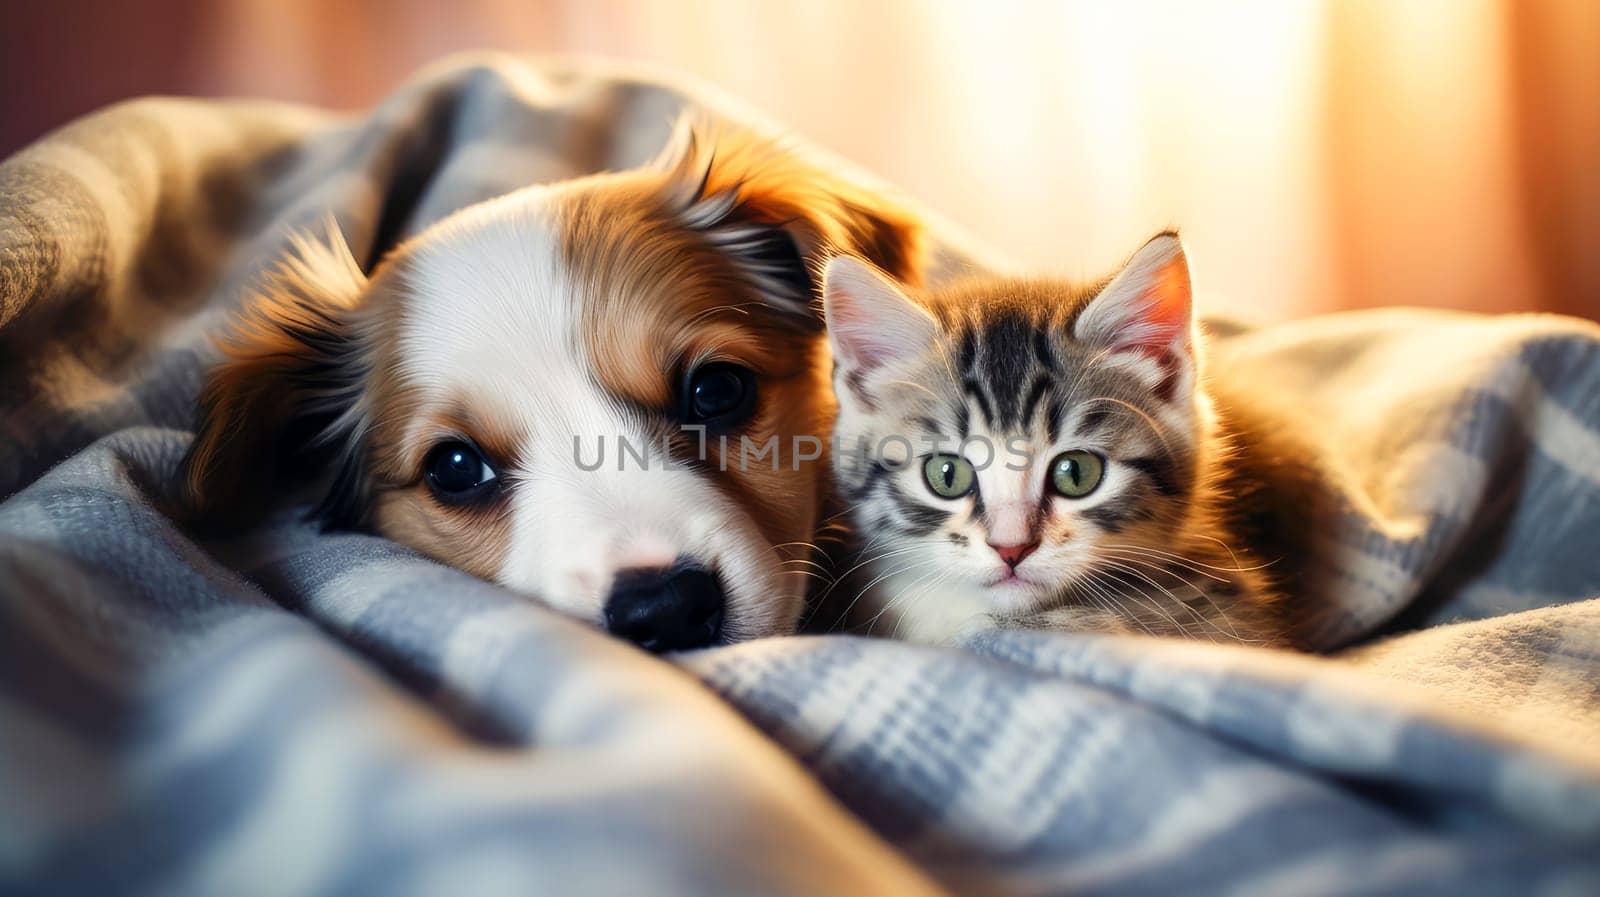 A happy, contented and cute kitten and puppy lie comfortably together under a blanket on the bed. by Alla_Yurtayeva